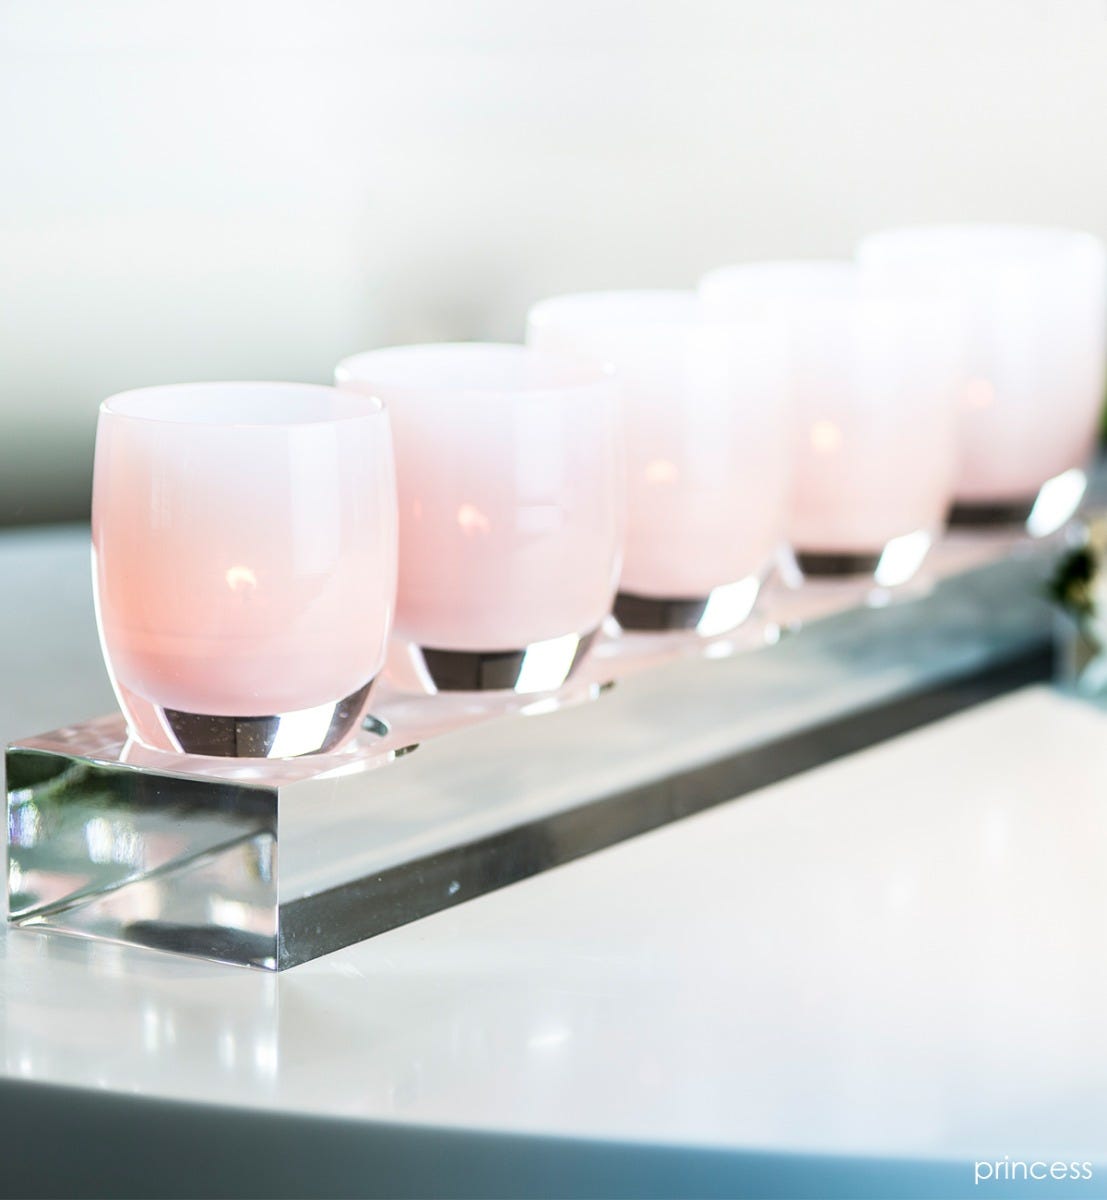 five well acrylic baby train, stand for hand-blown glass votive candle holders, paired with princess